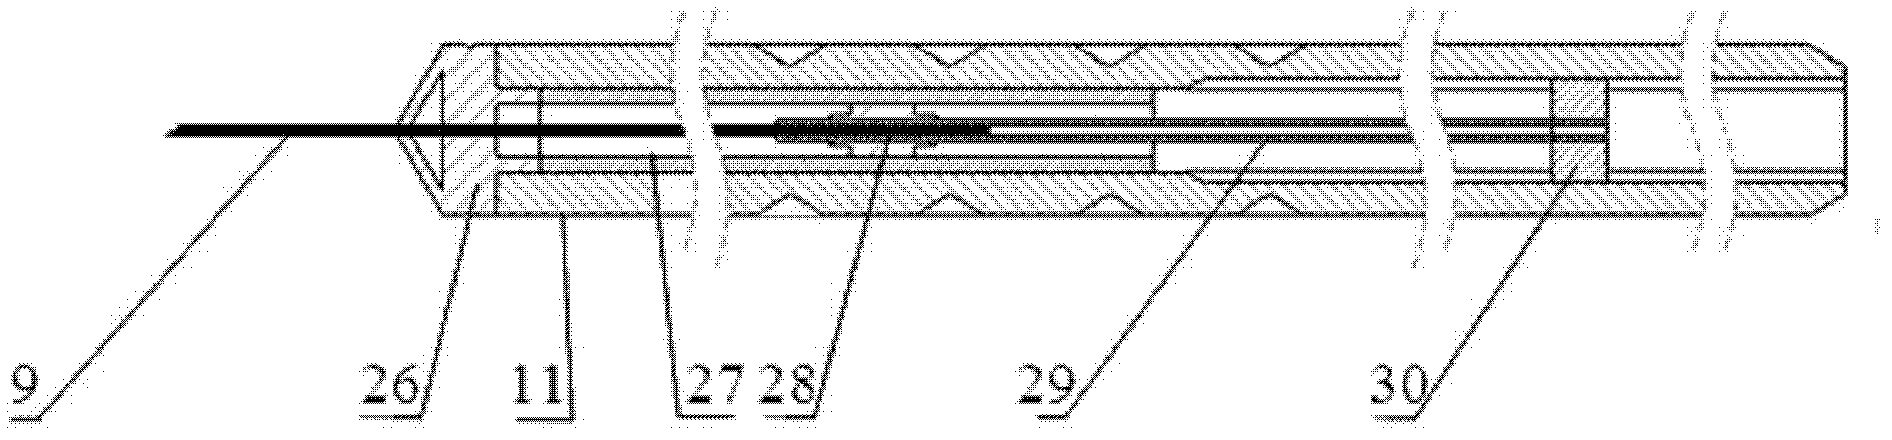 Acupuncture manipulator mechanism for nuclear magnetic resonance environment